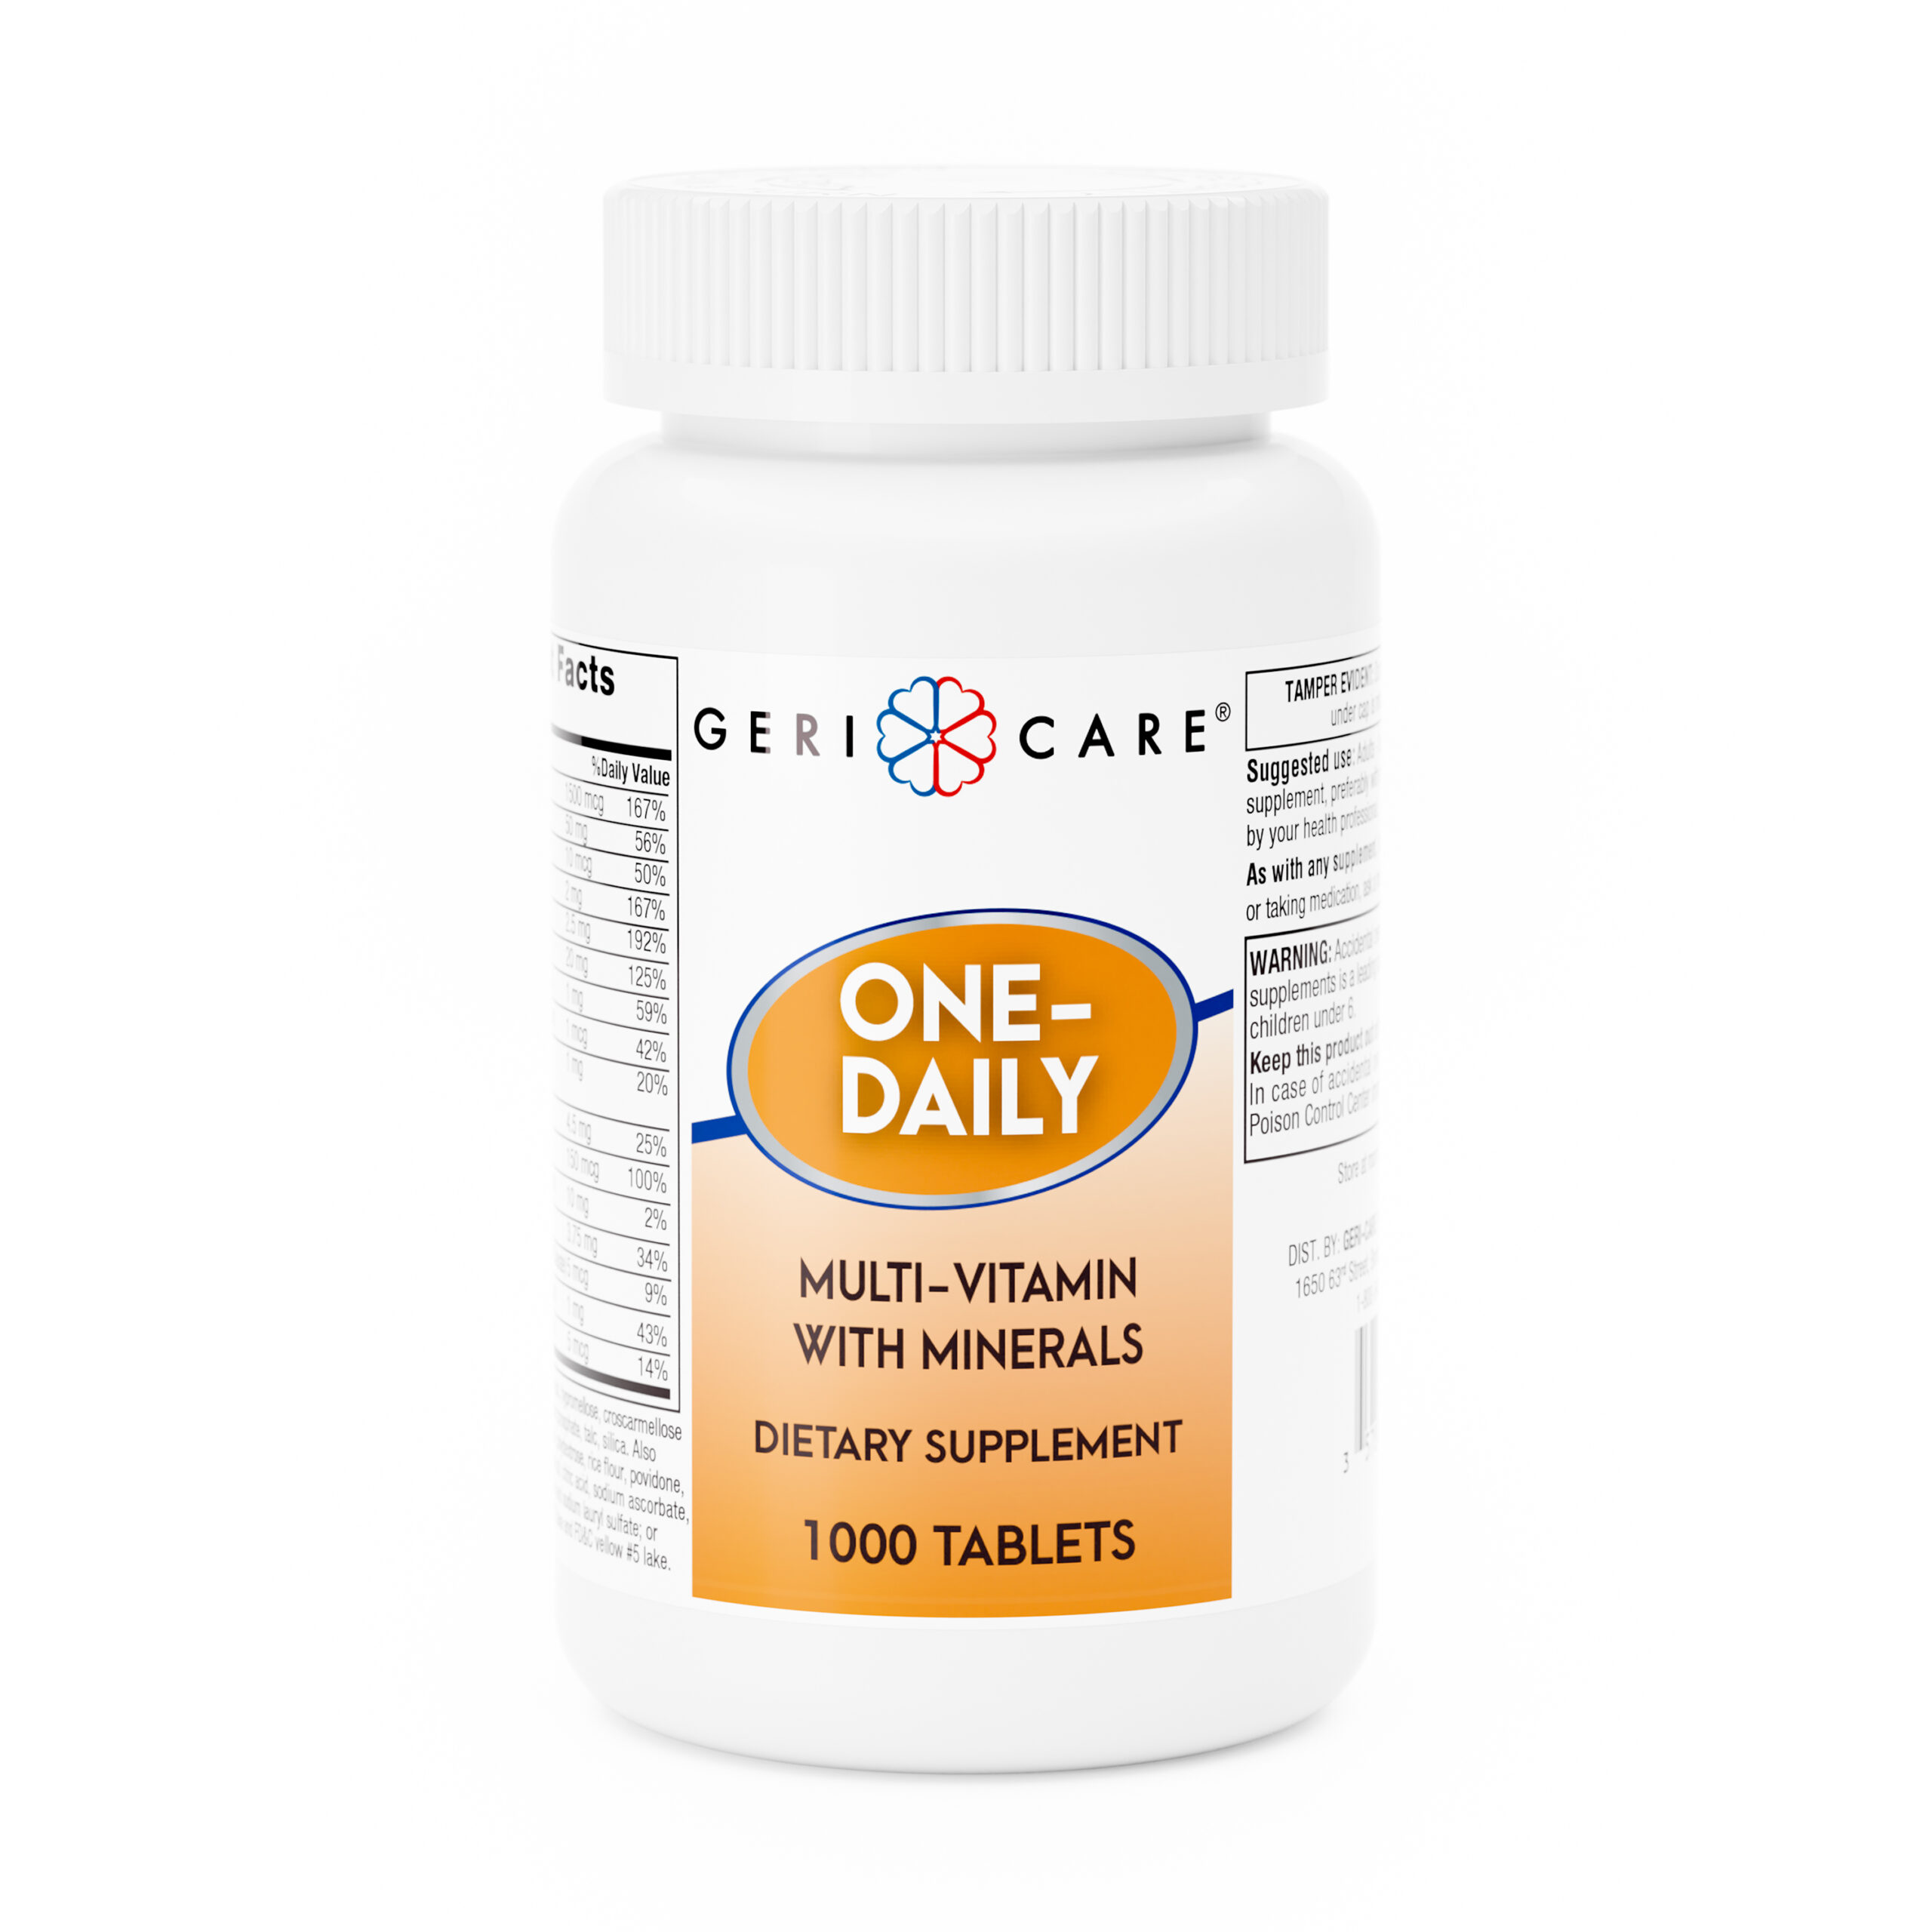 One-Daily Multi-Vitamin + Minerals – 1000 Tablets